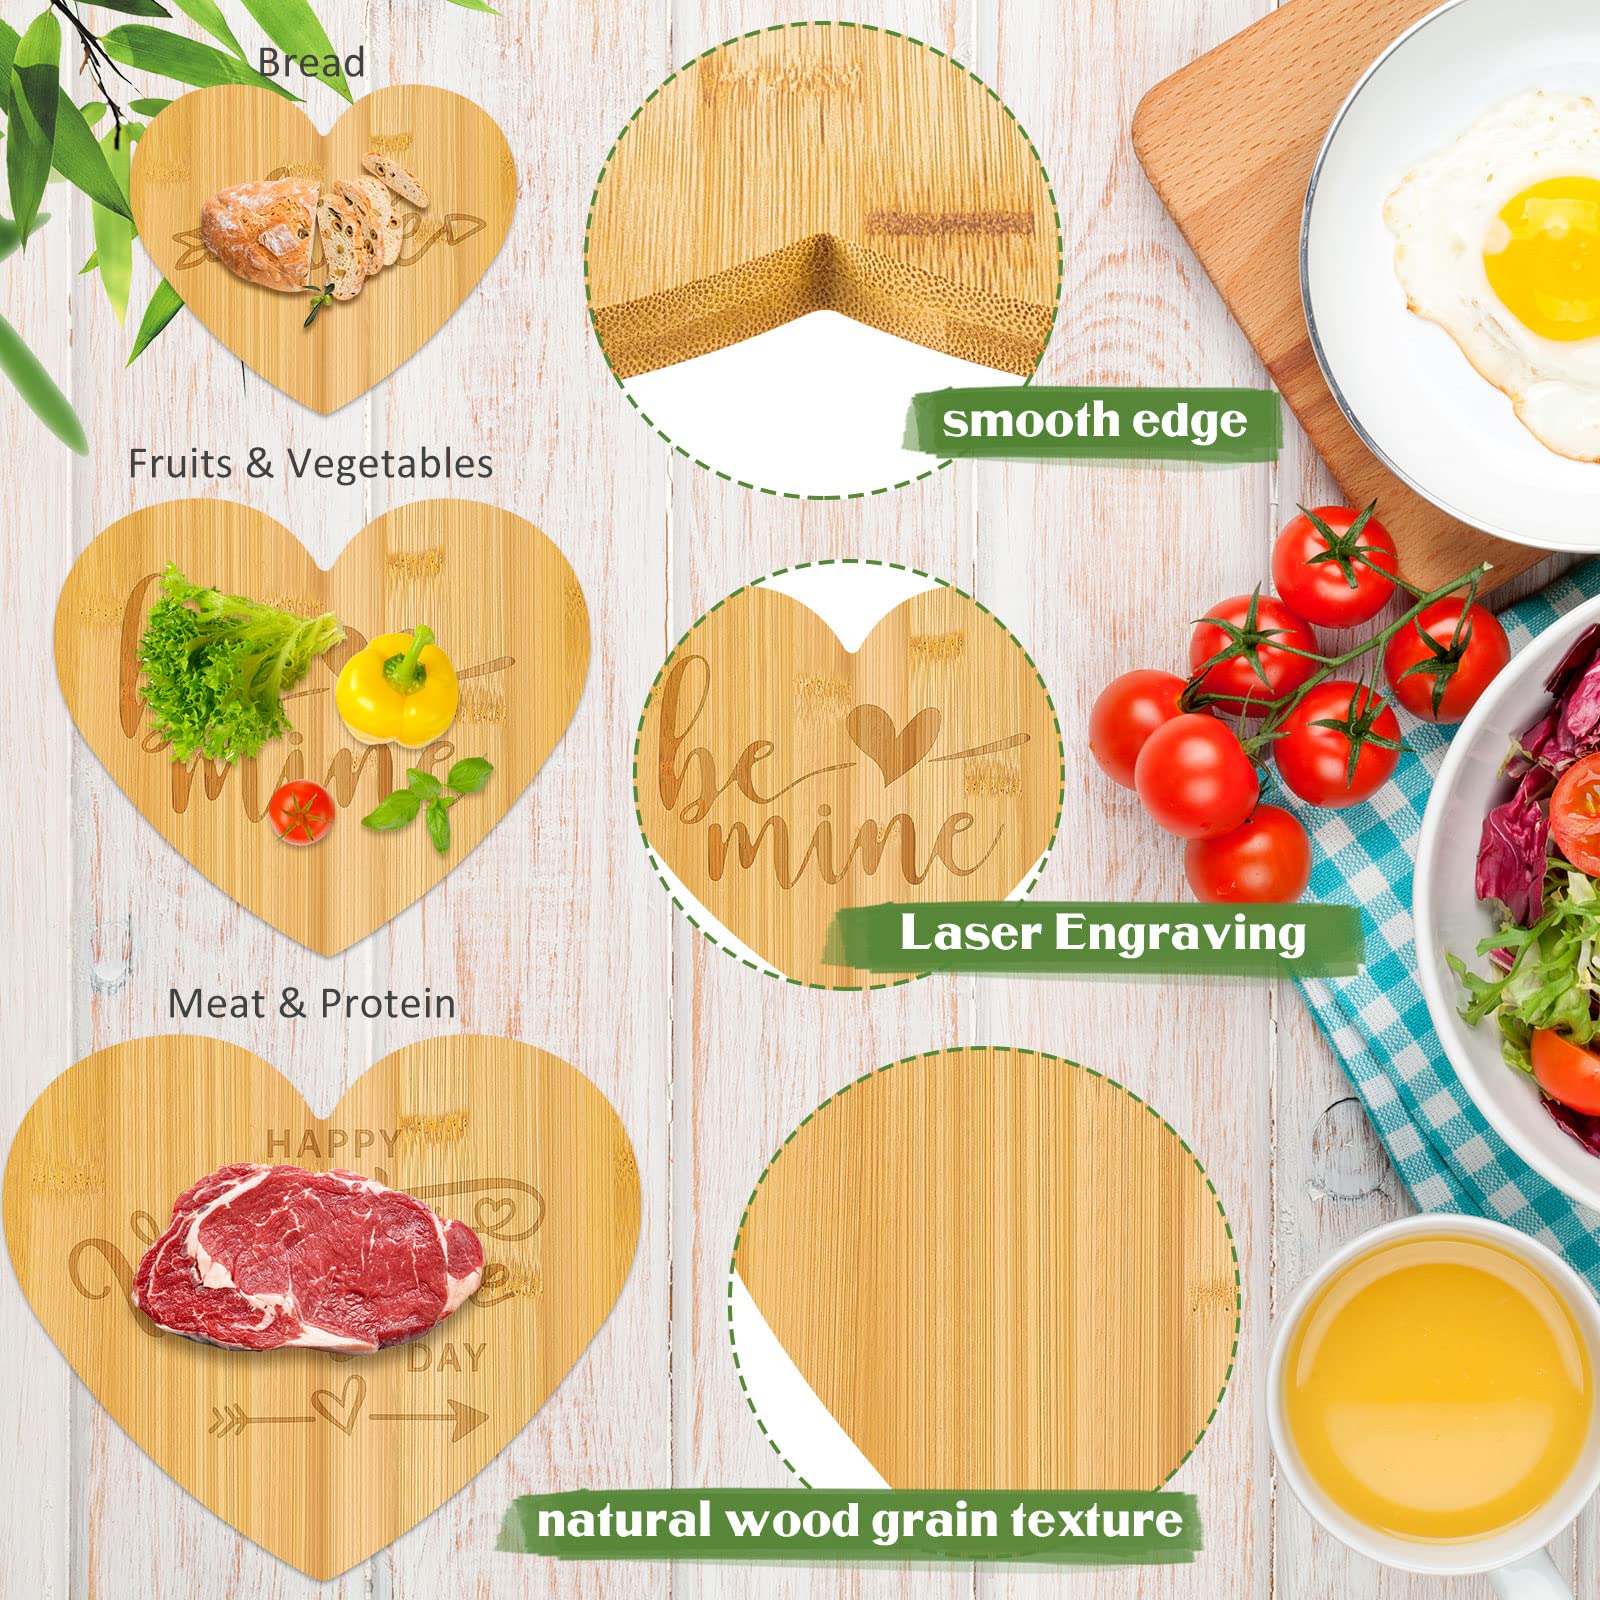 3 Pcs Valentine's Day Heart Shaped Cutting Board Wood Bamboo Serving Board 13in 11in 8.3in Charcuterie Bread Board Cheese Serving Platter for Valentine's Day Wedding Anniversary Birthday (Romantic)